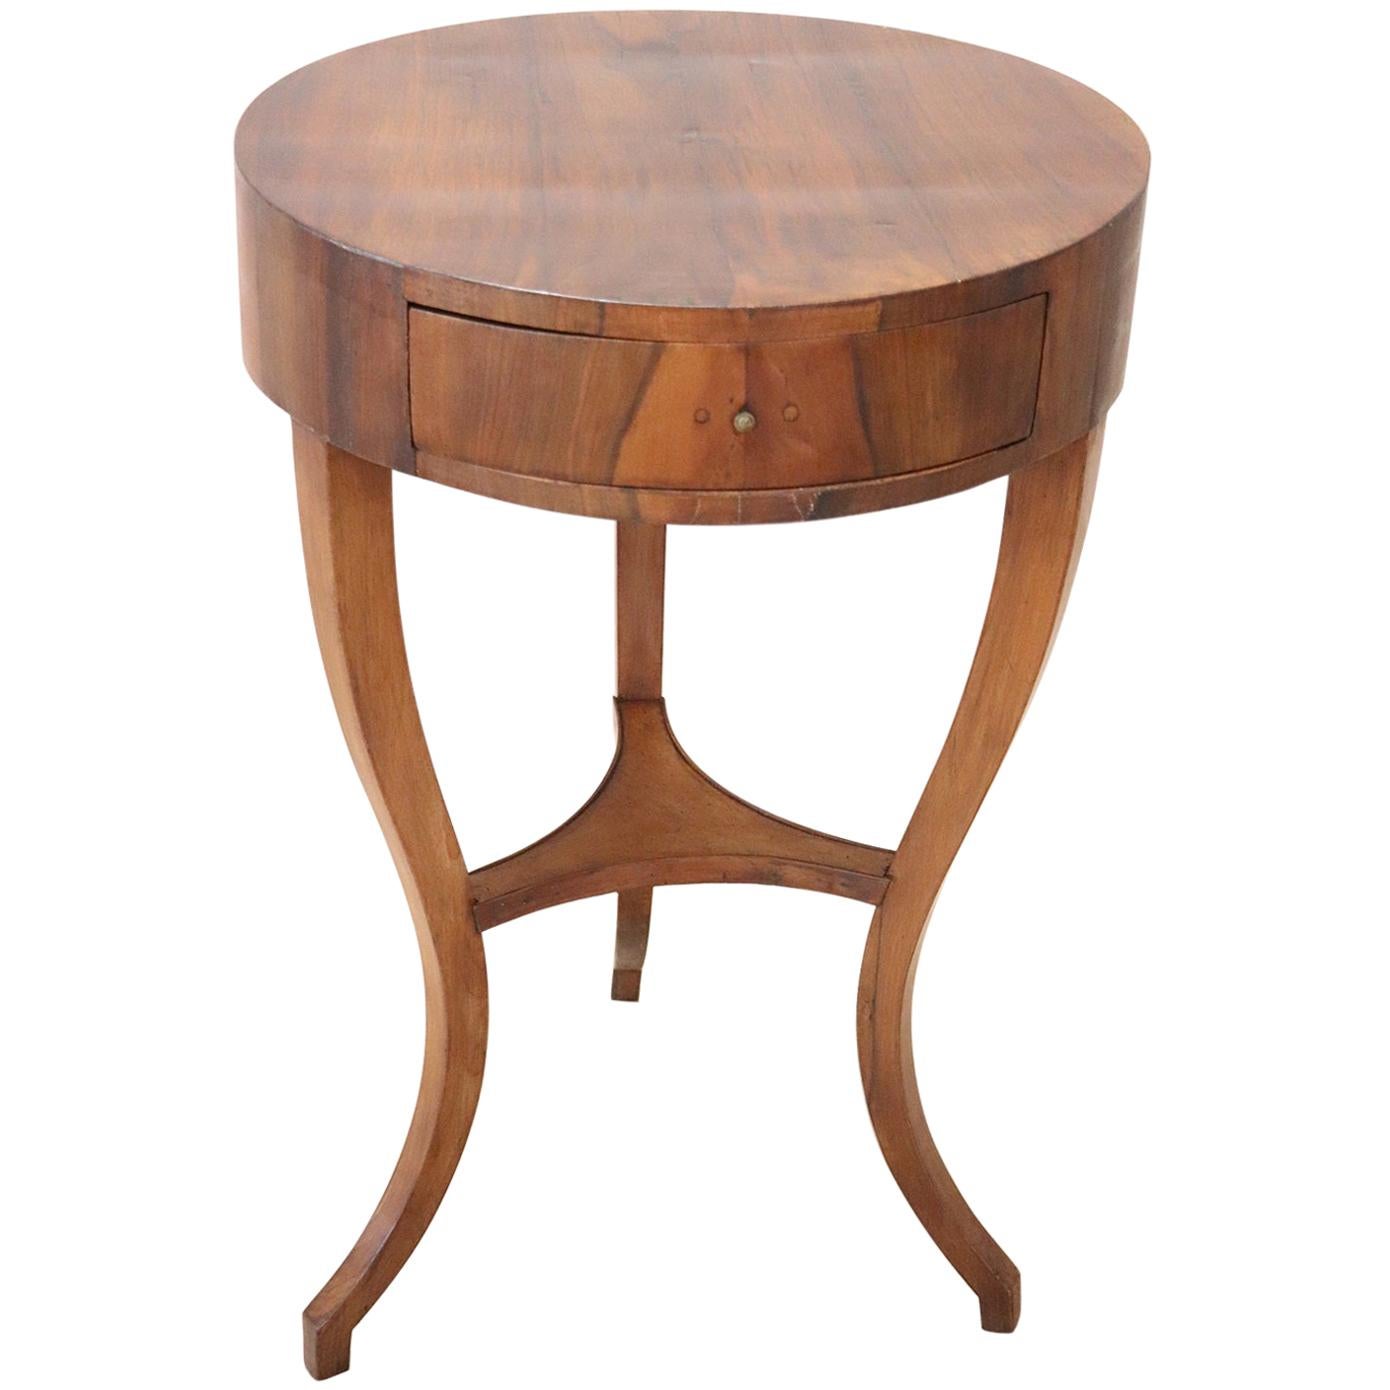 18th Century Italian Directoire Walnut Round Side Table or Pedestal Table